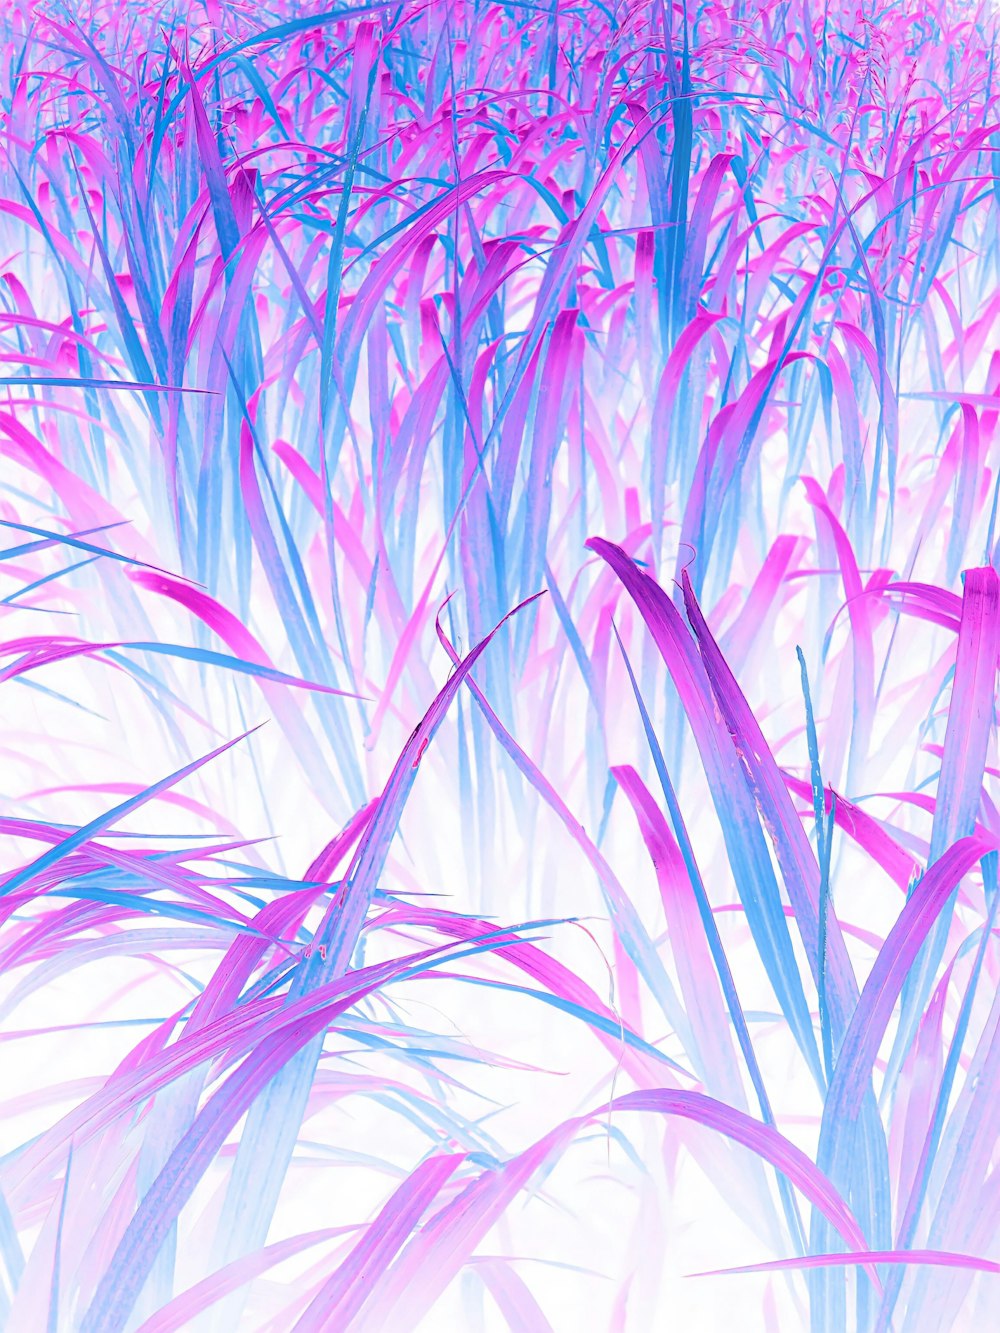 a picture of a field of purple and blue grass